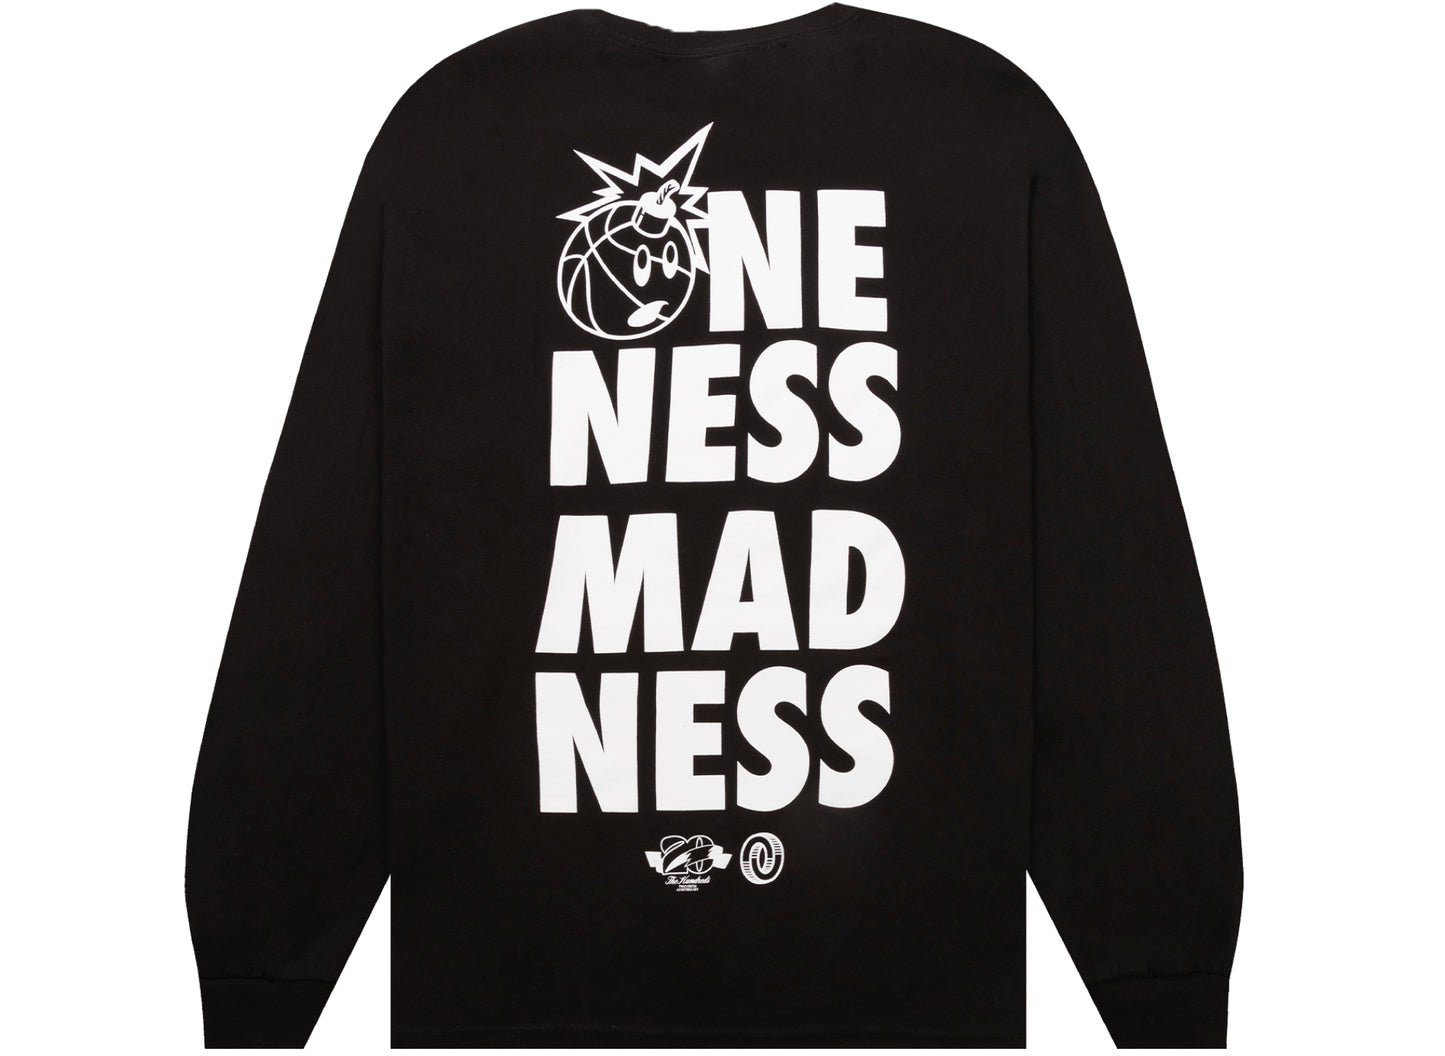 The Hundreds Oneness Madness L/S Tee in Black